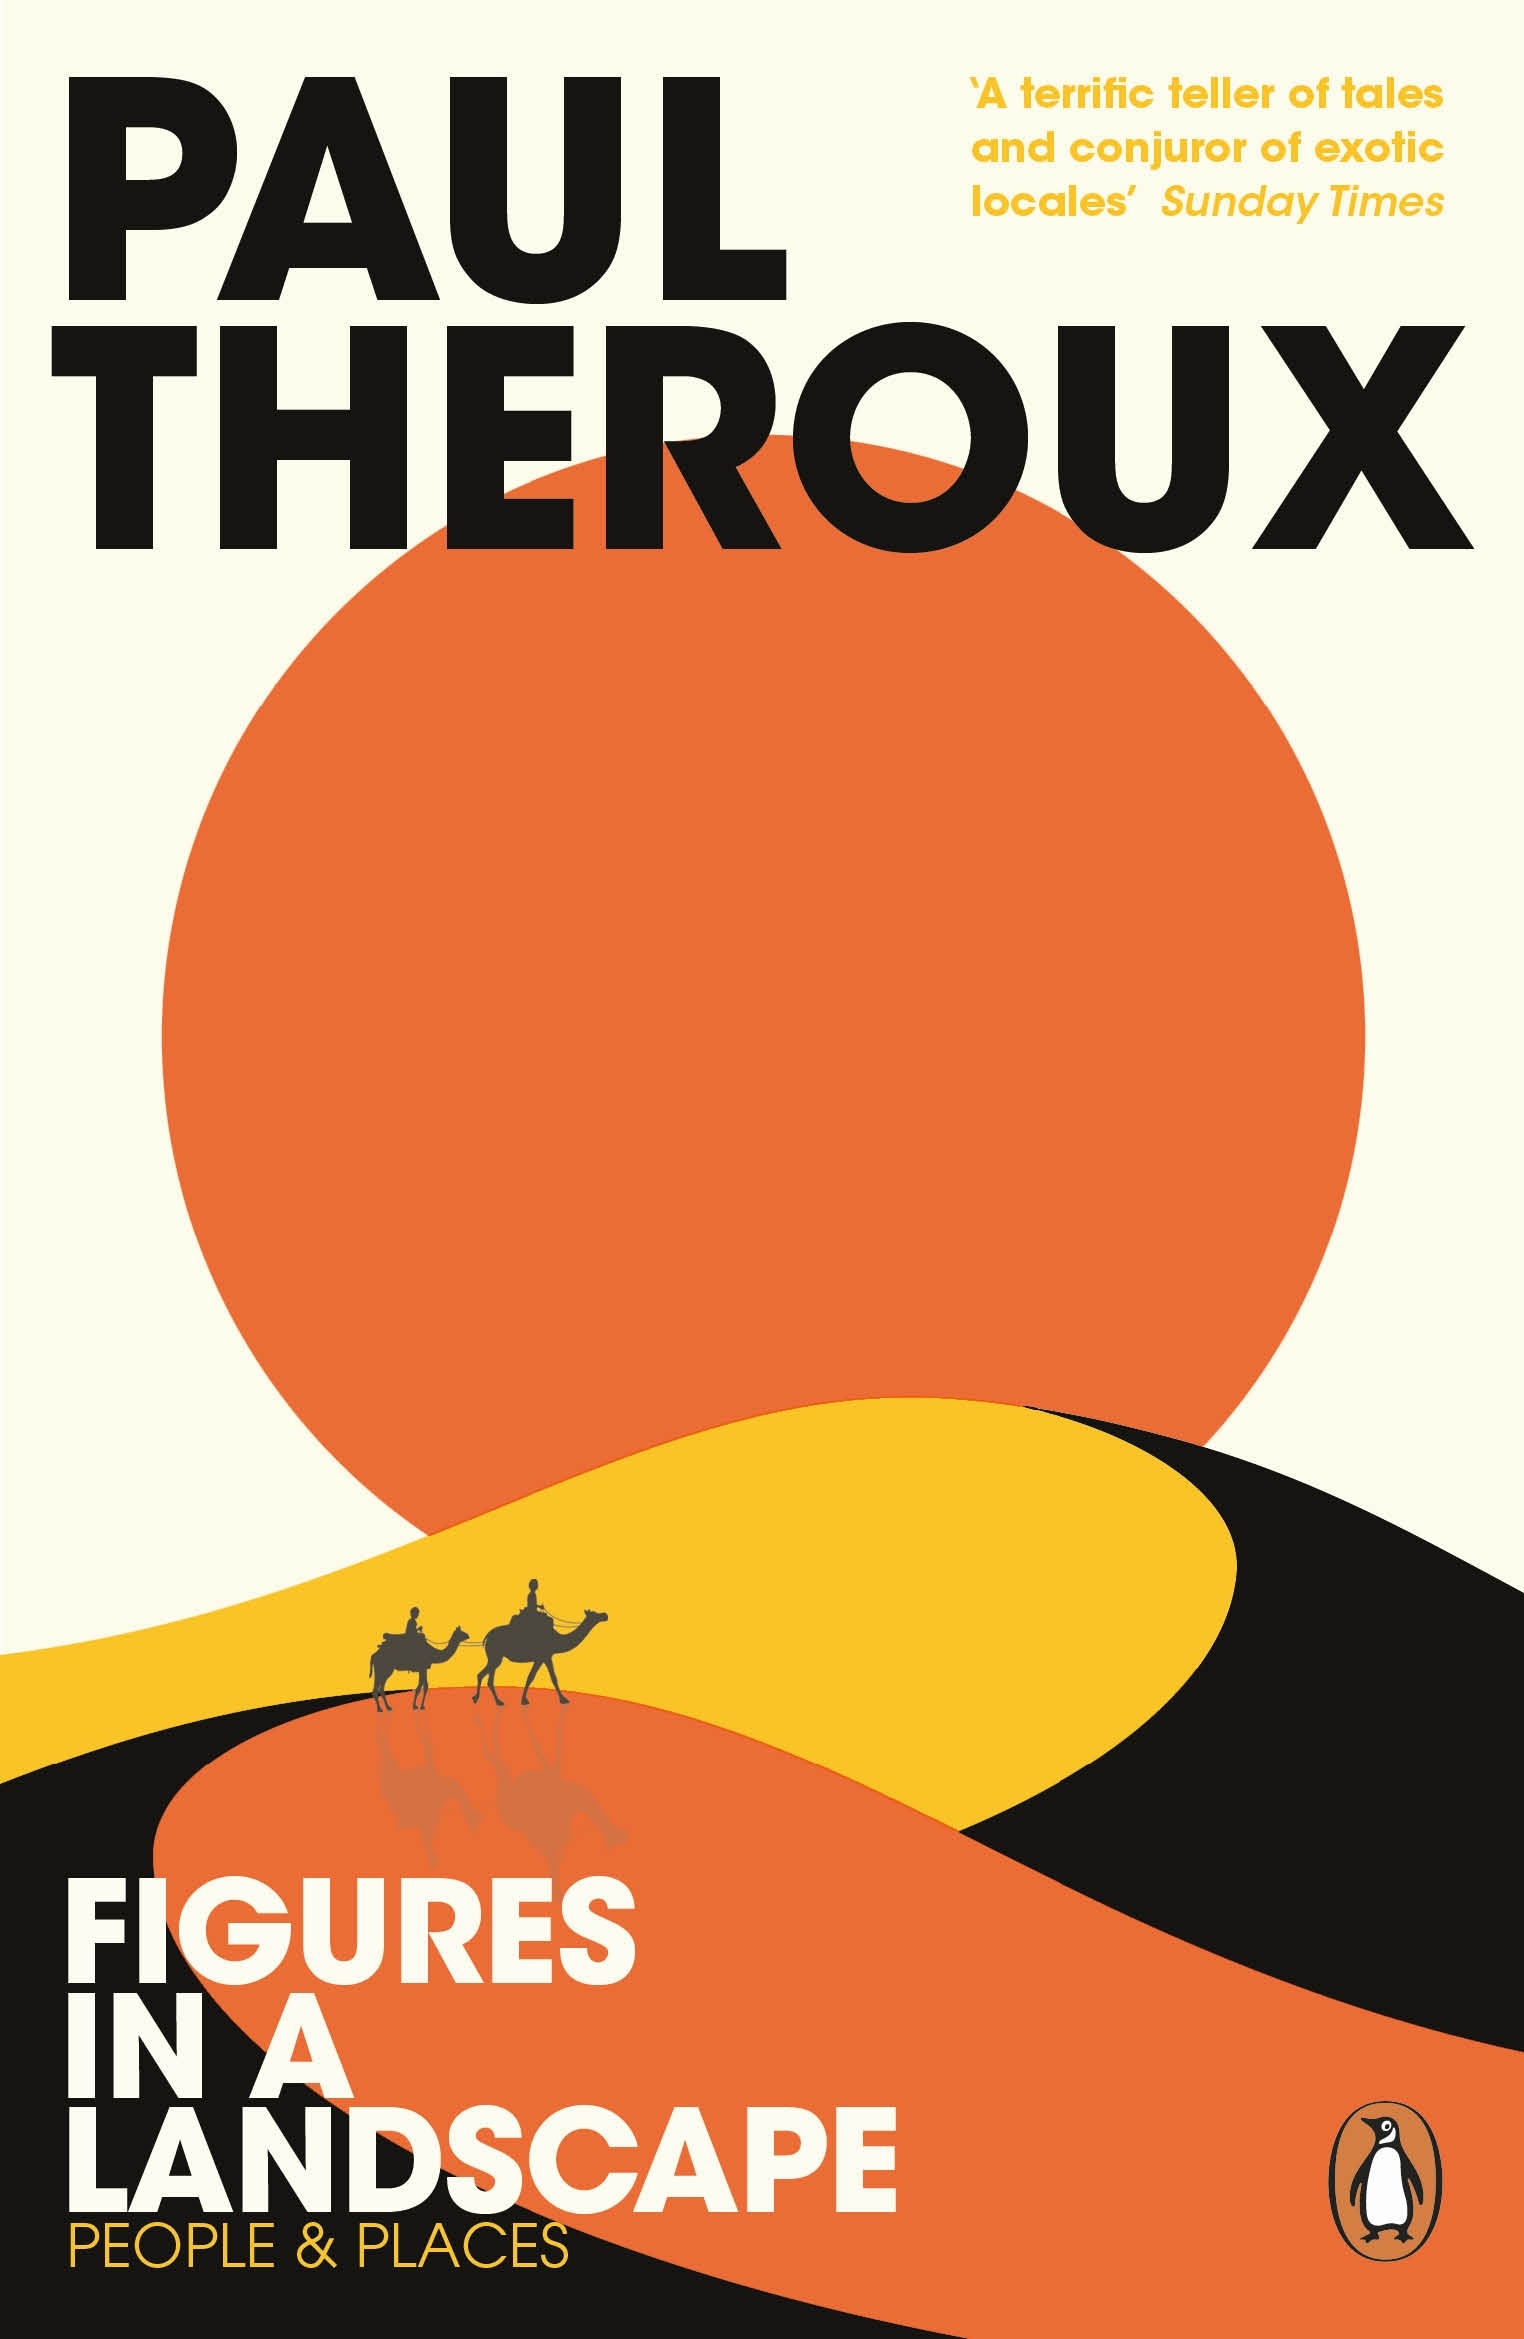 Book “Figures in a Landscape” by Paul Theroux — April 25, 2019